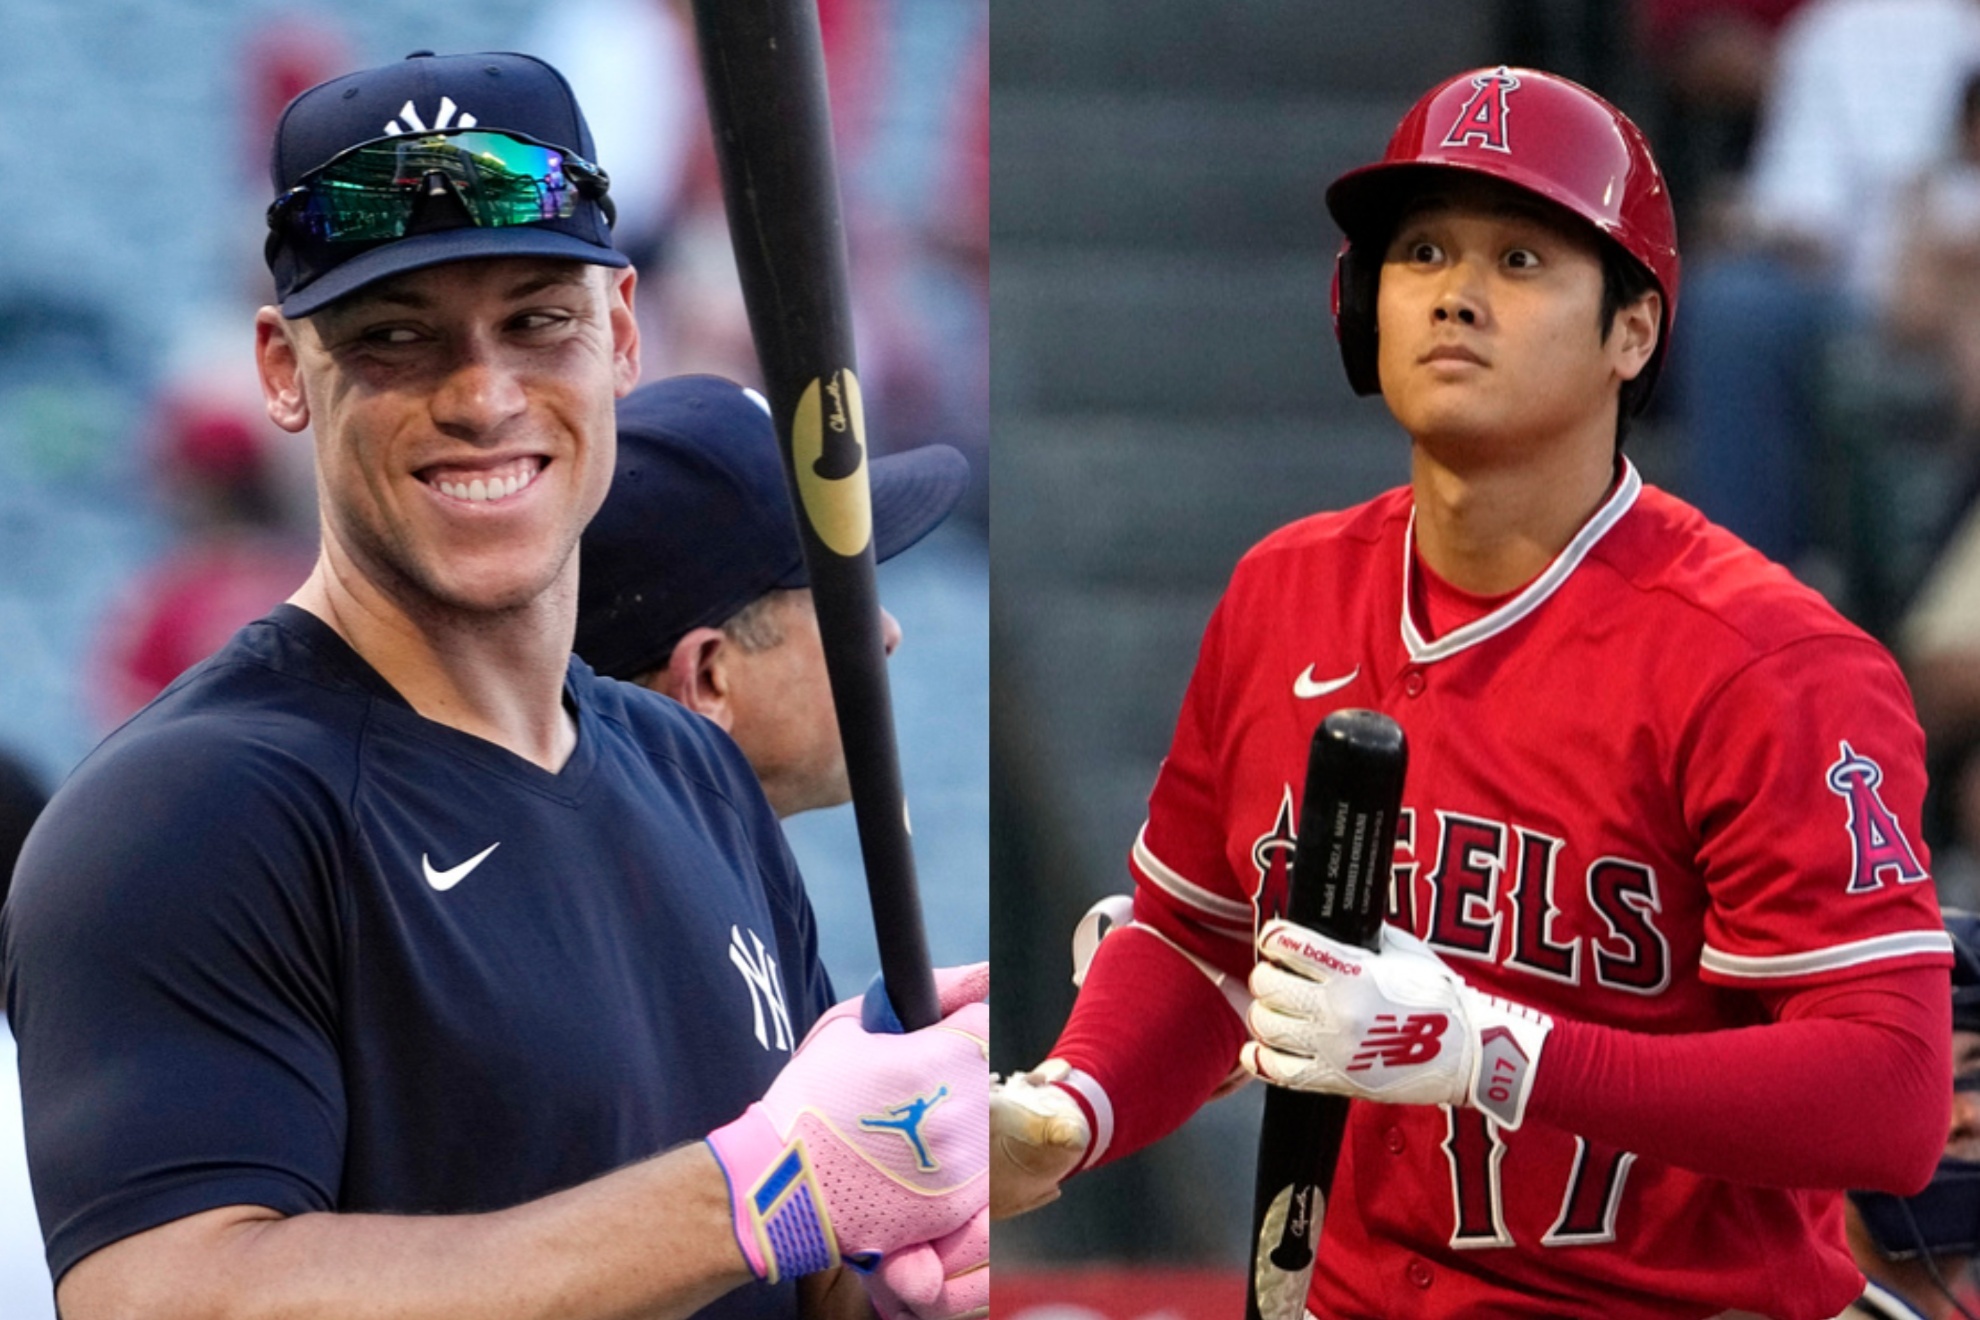 Aaron Judge says he is excited to watch Shohei Ohtani